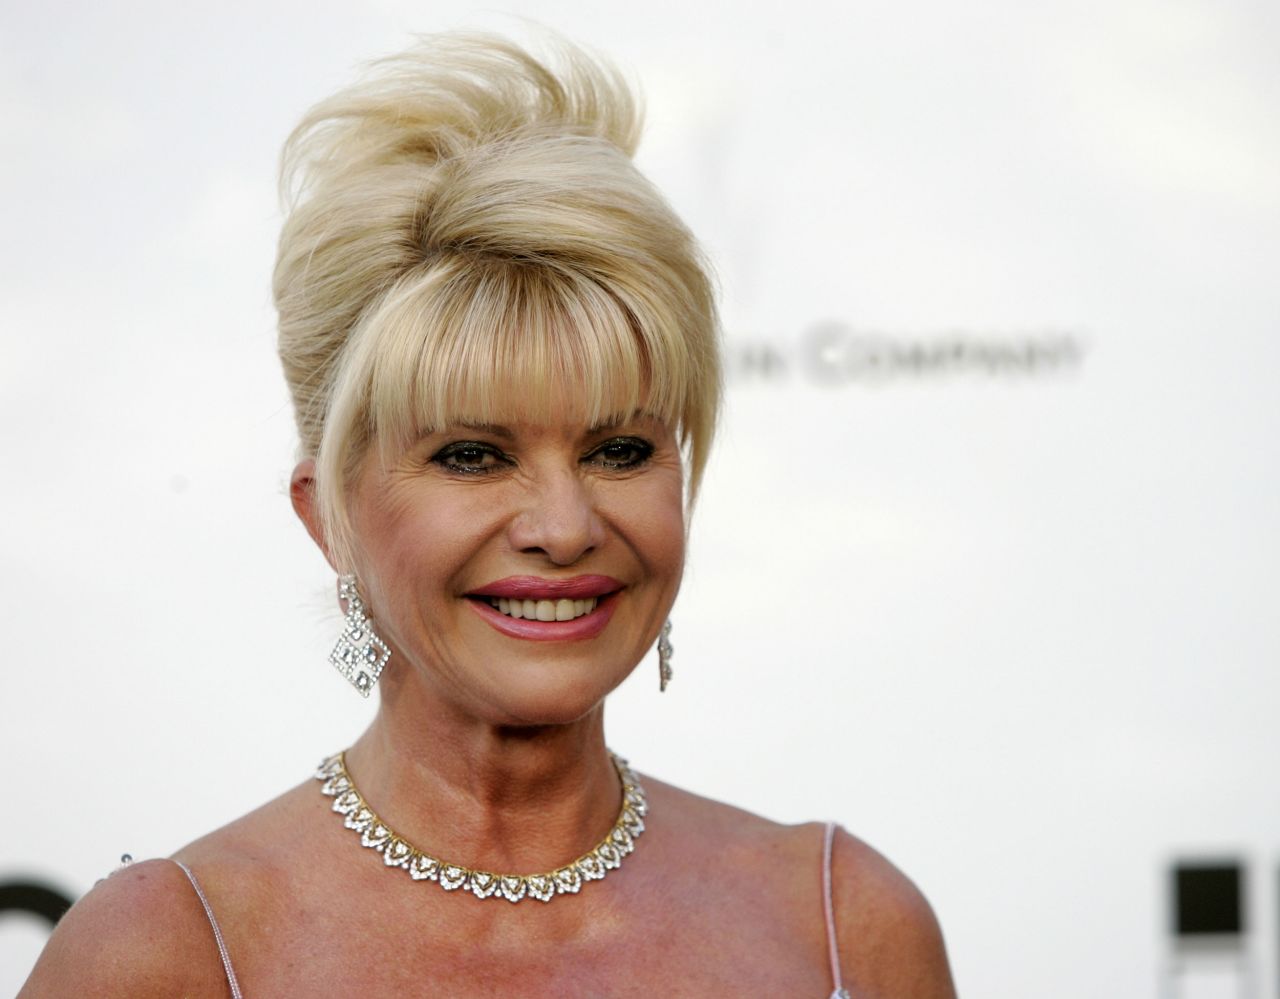 Ivana Trump, a longtime businessperson and an ex-wife of former US President Donald Trump, died at the age of 73, the former President posted on Truth Social on July 14. Ivana Trump was the mother of Donald Jr., Ivanka and Eric Trump.